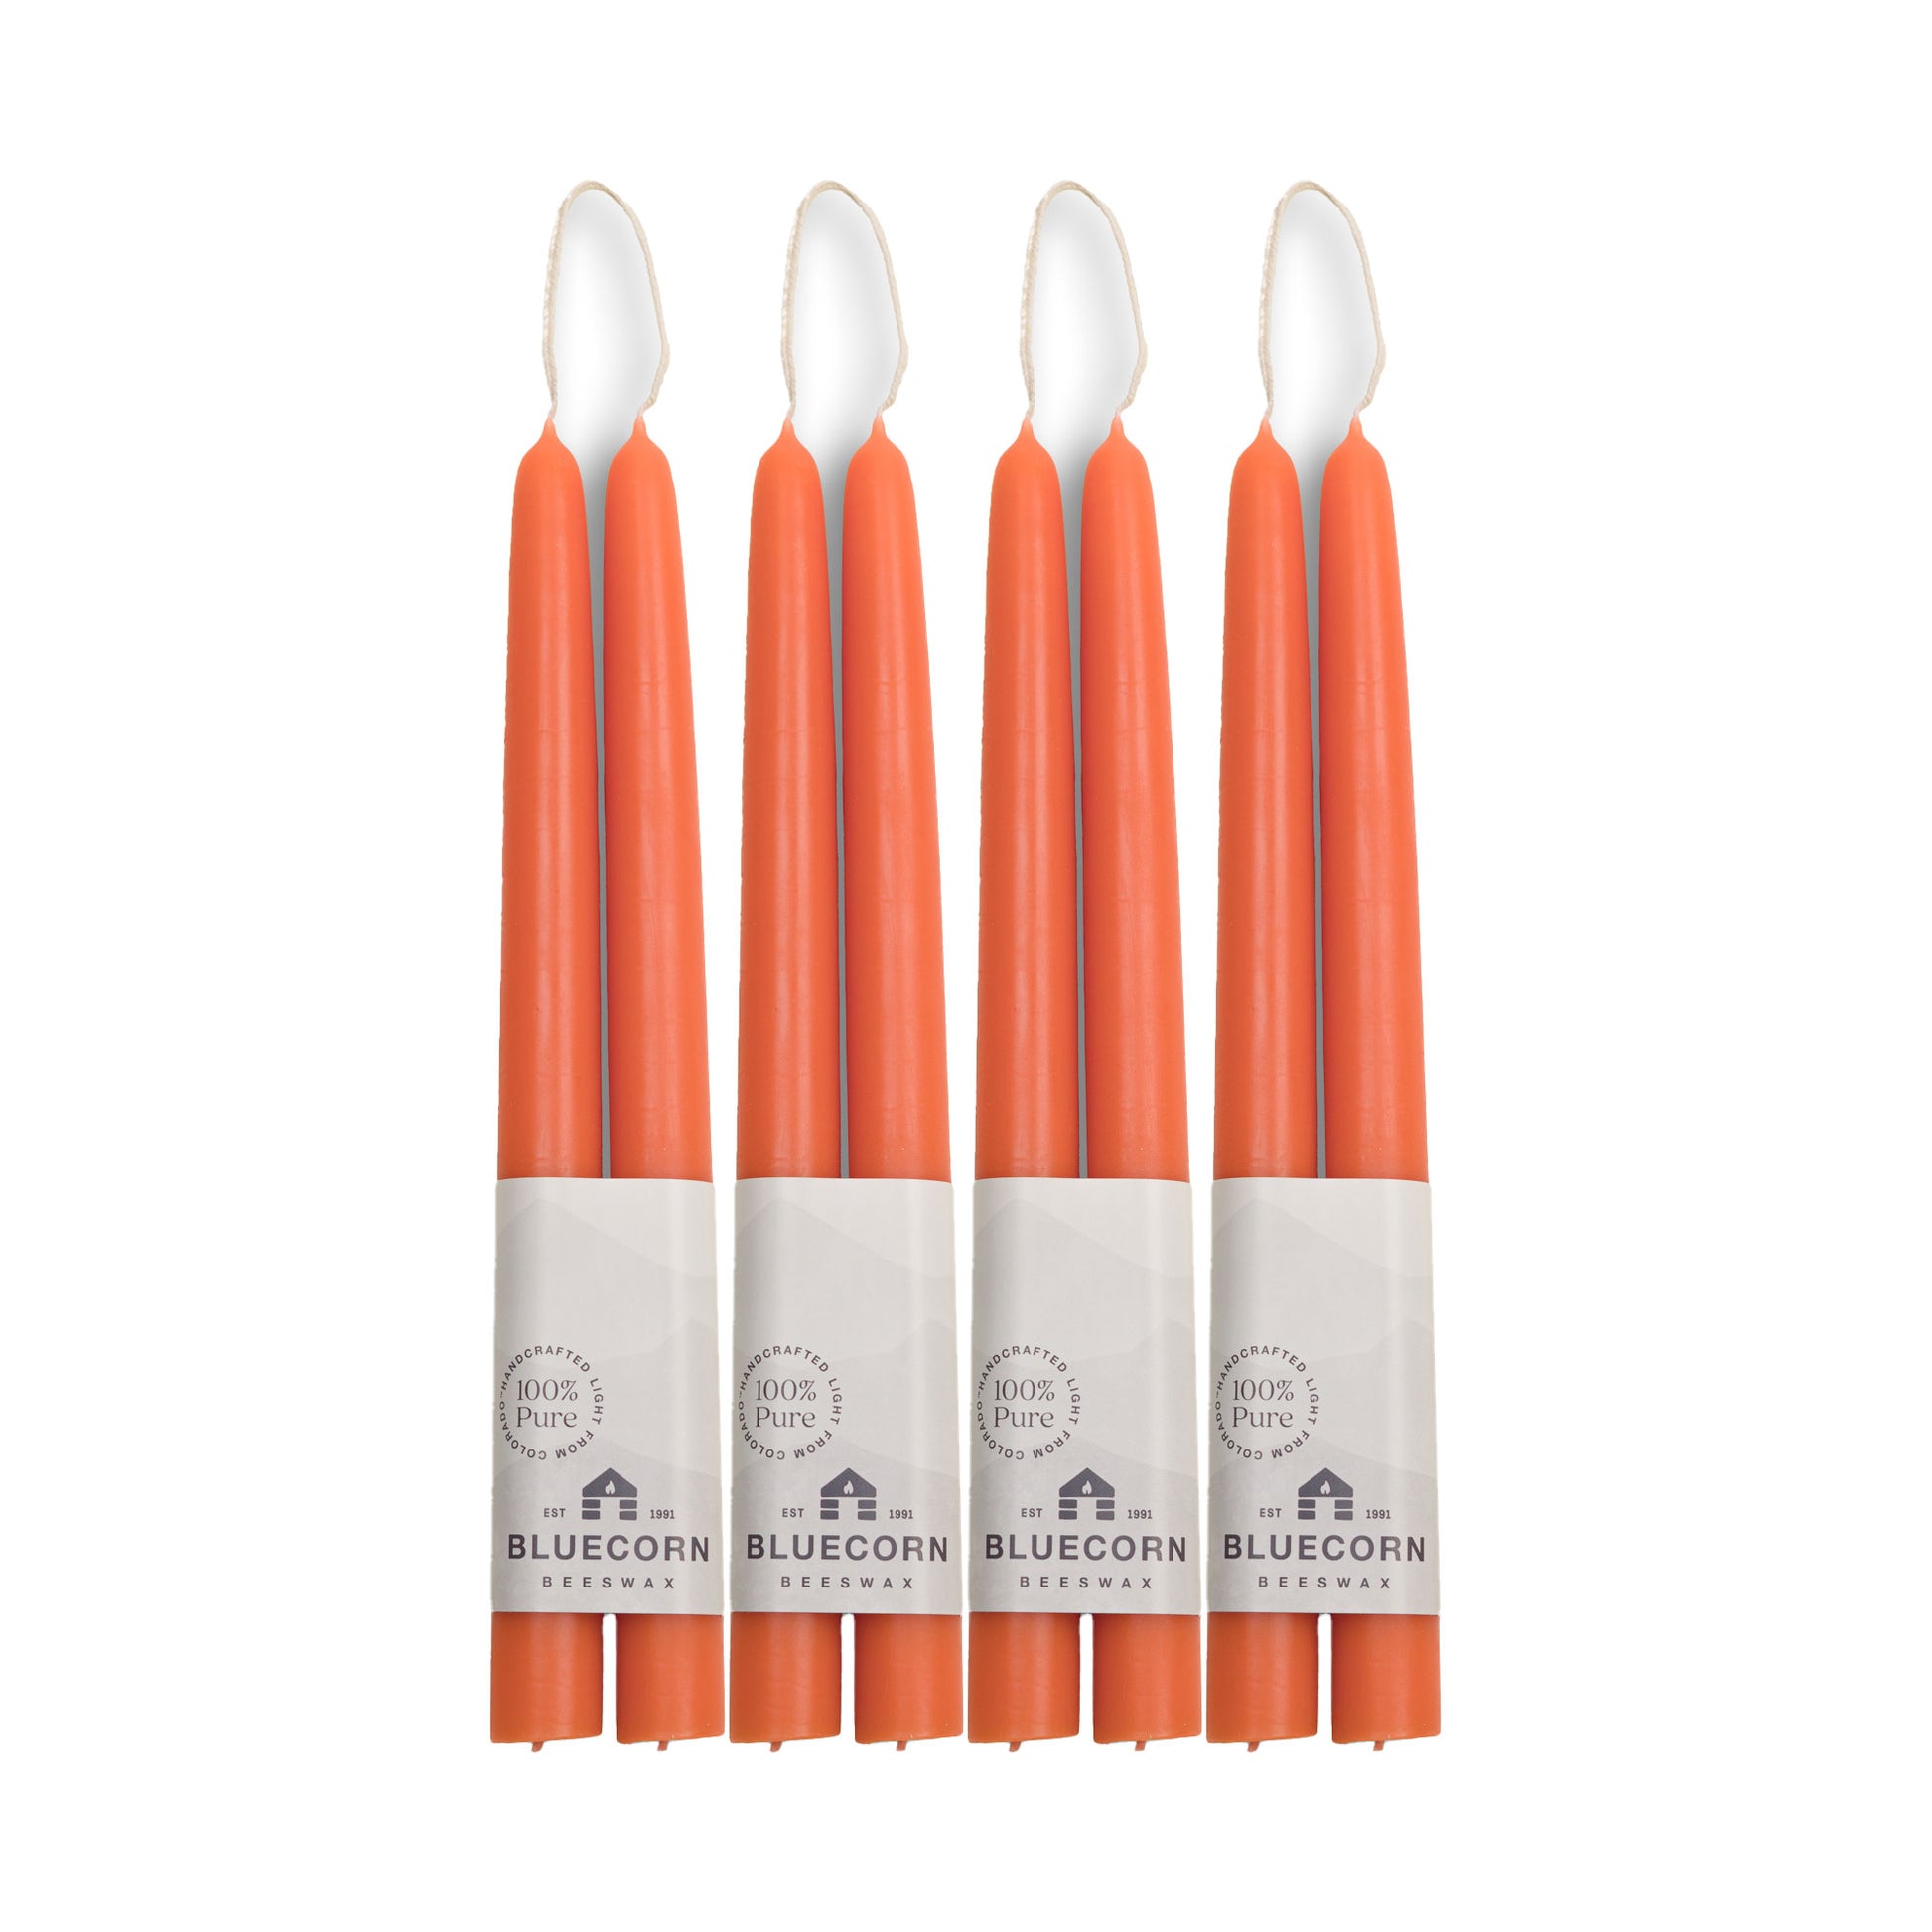 beeswax tapers in peach/ apricot color taper candles bluecorn candles beeswax candles